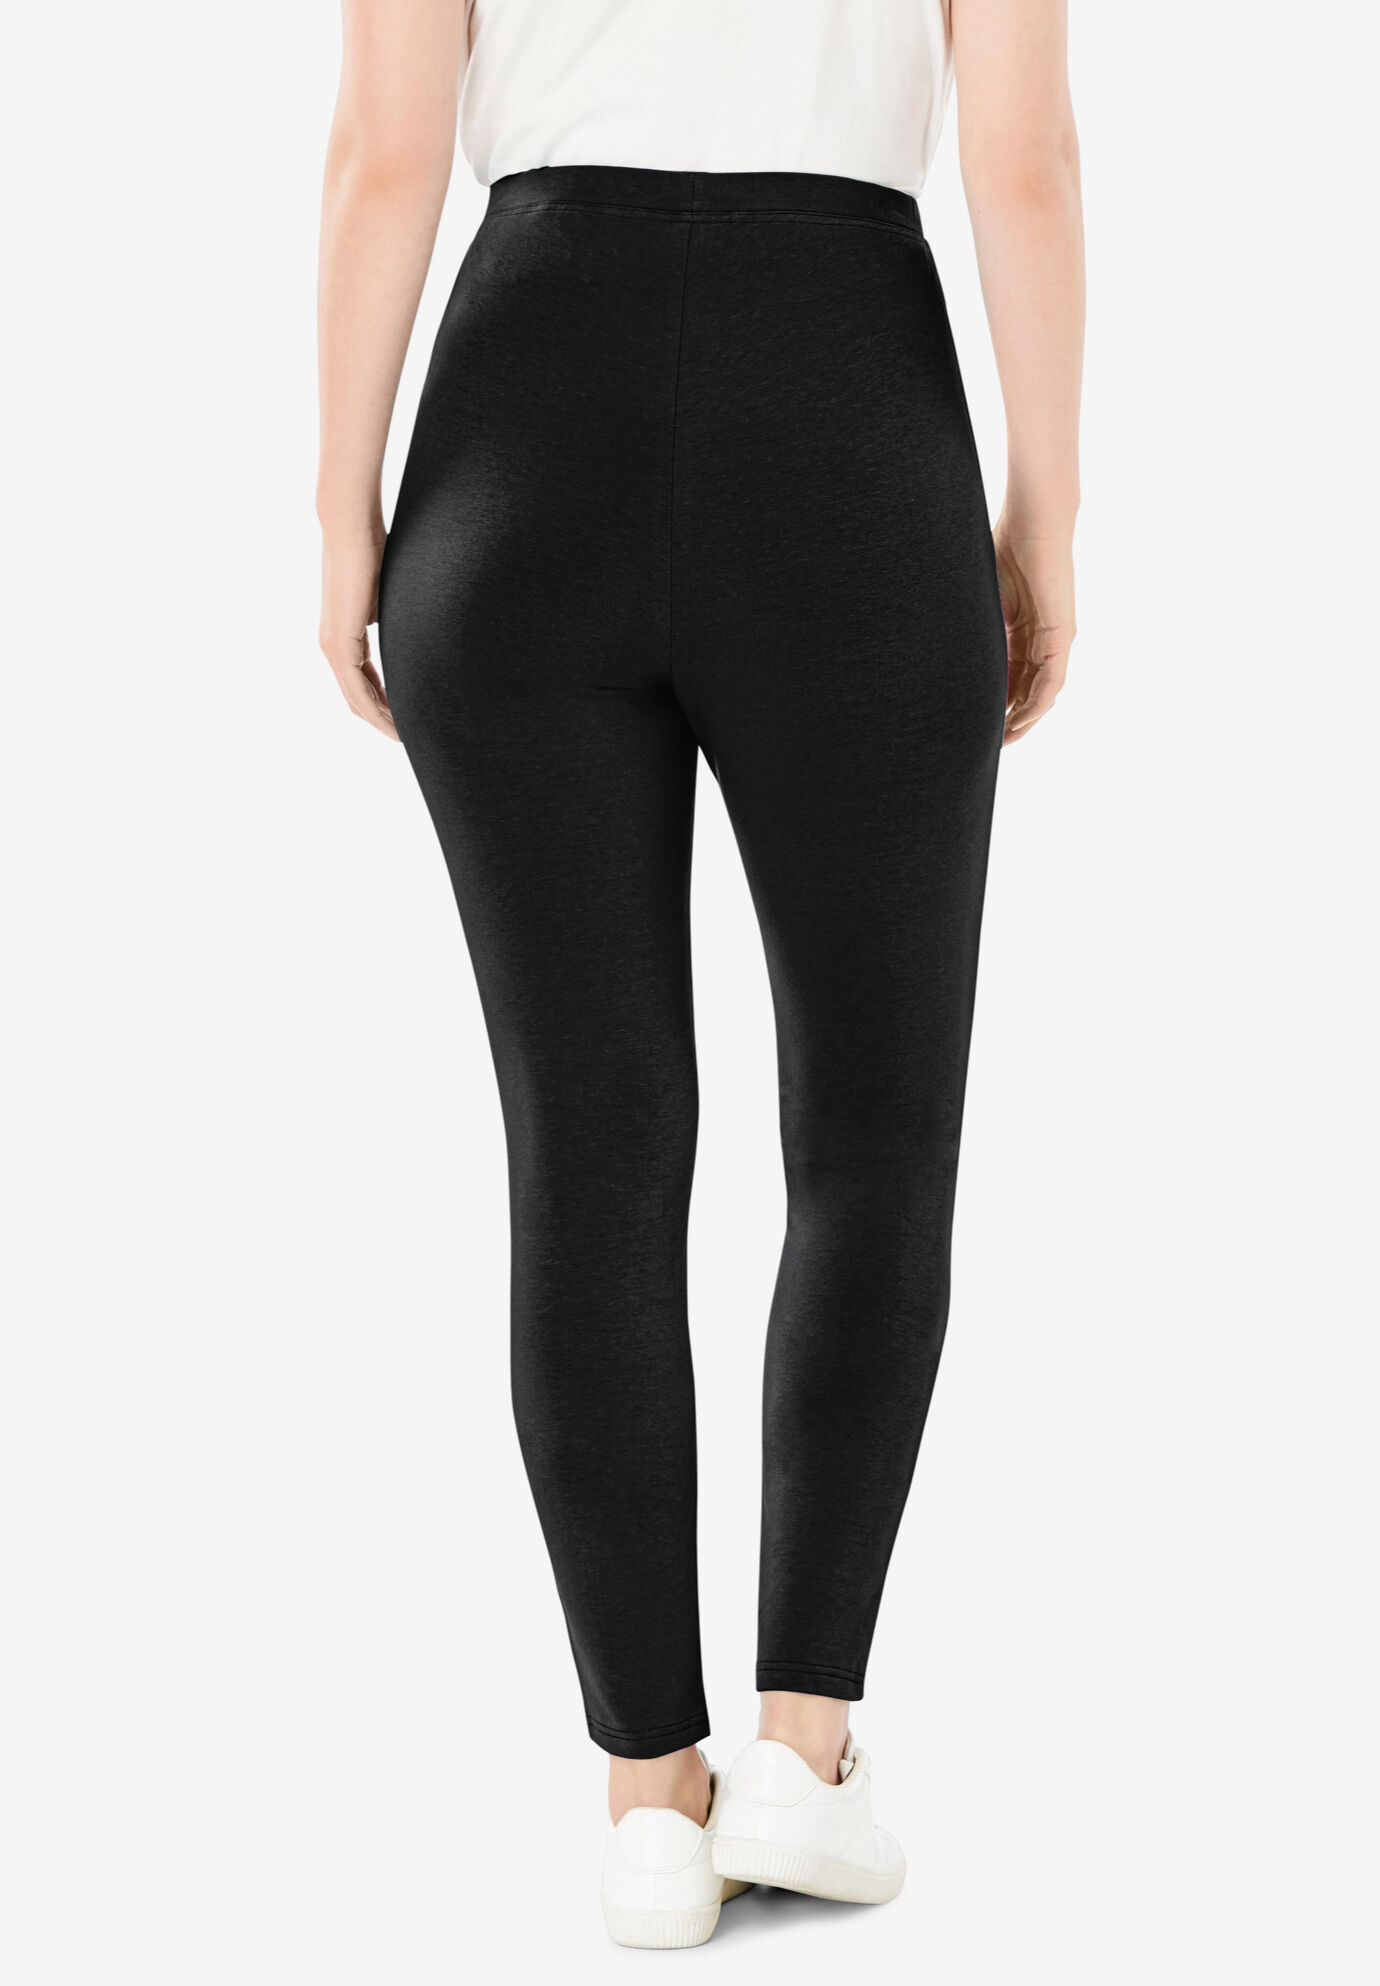 Ladies Black Cotton Legging at Rs.450/Piece in coimbatore offer by Sona  Sansaar